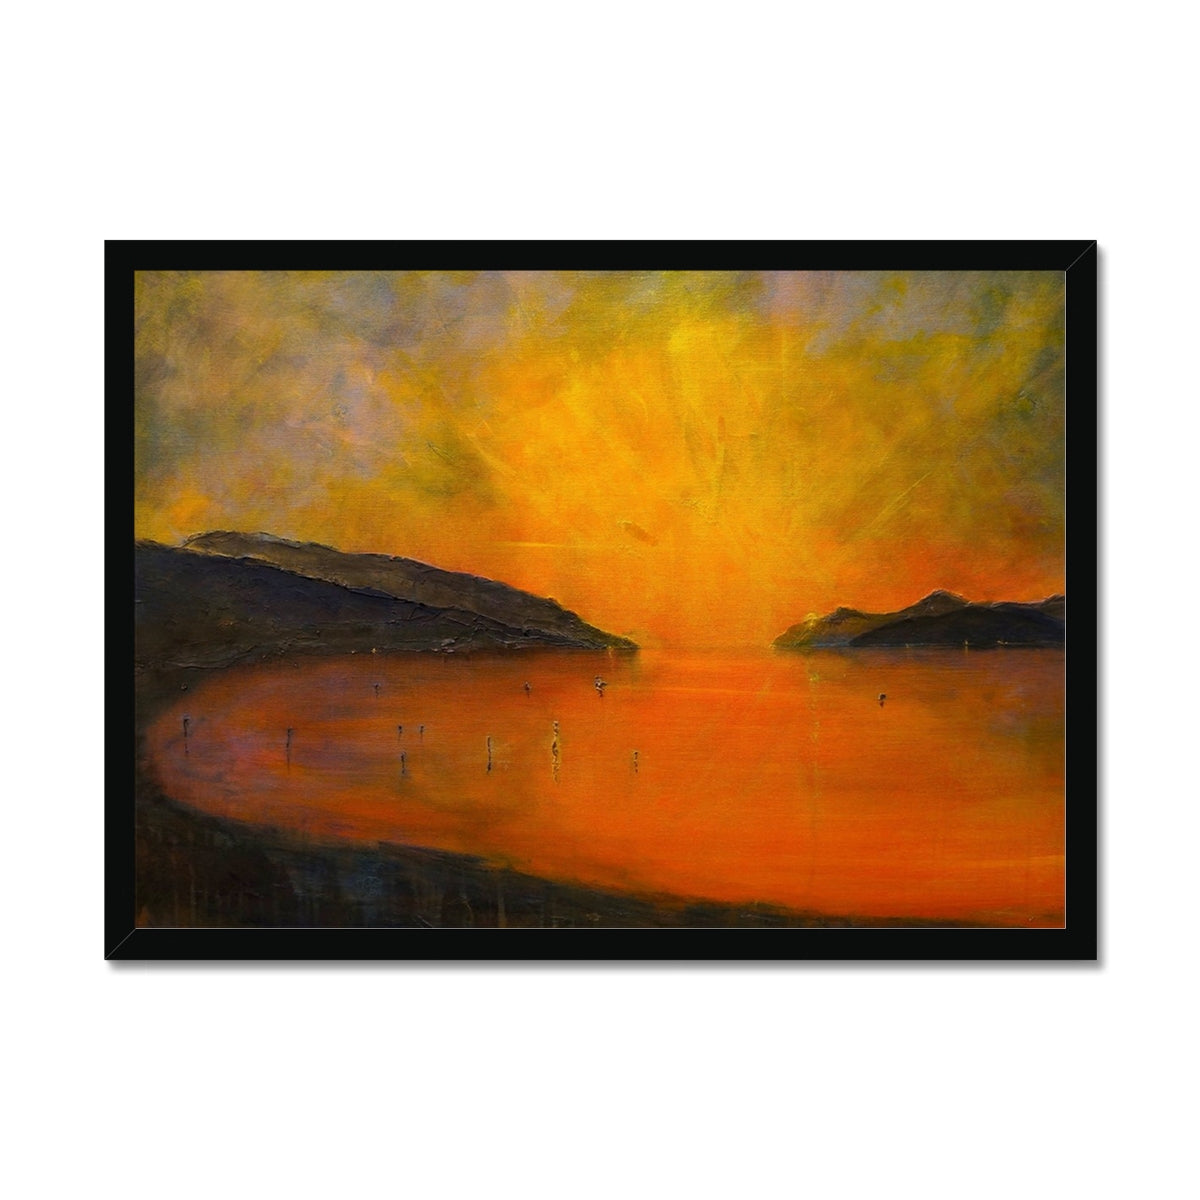 Loch Ness Sunset Painting | Framed Prints From Scotland-Framed Prints-Scottish Lochs & Mountains Art Gallery-A2 Landscape-Black Frame-Paintings, Prints, Homeware, Art Gifts From Scotland By Scottish Artist Kevin Hunter